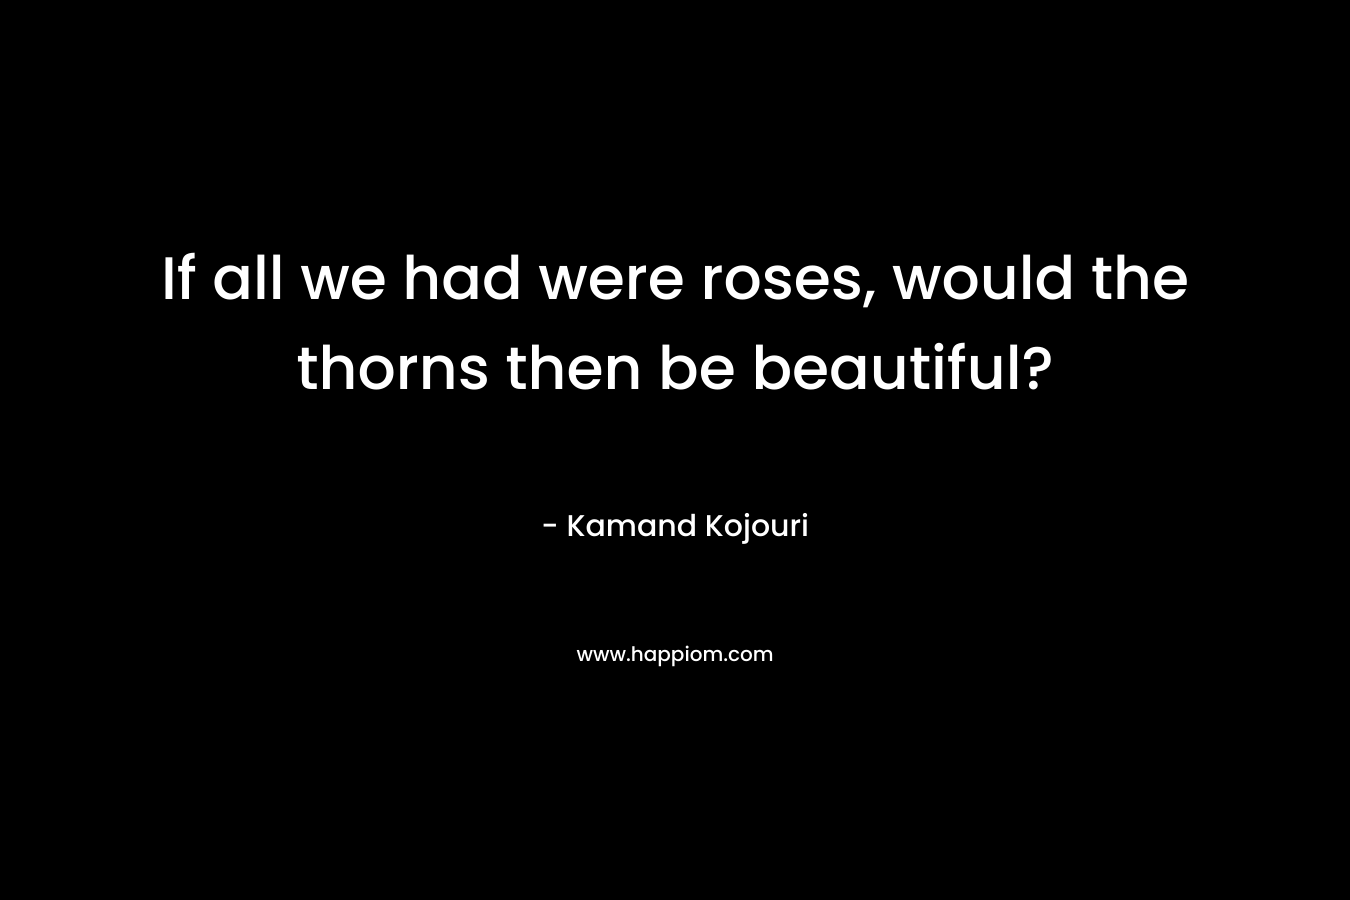 If all we had were roses, would the thorns then be beautiful?